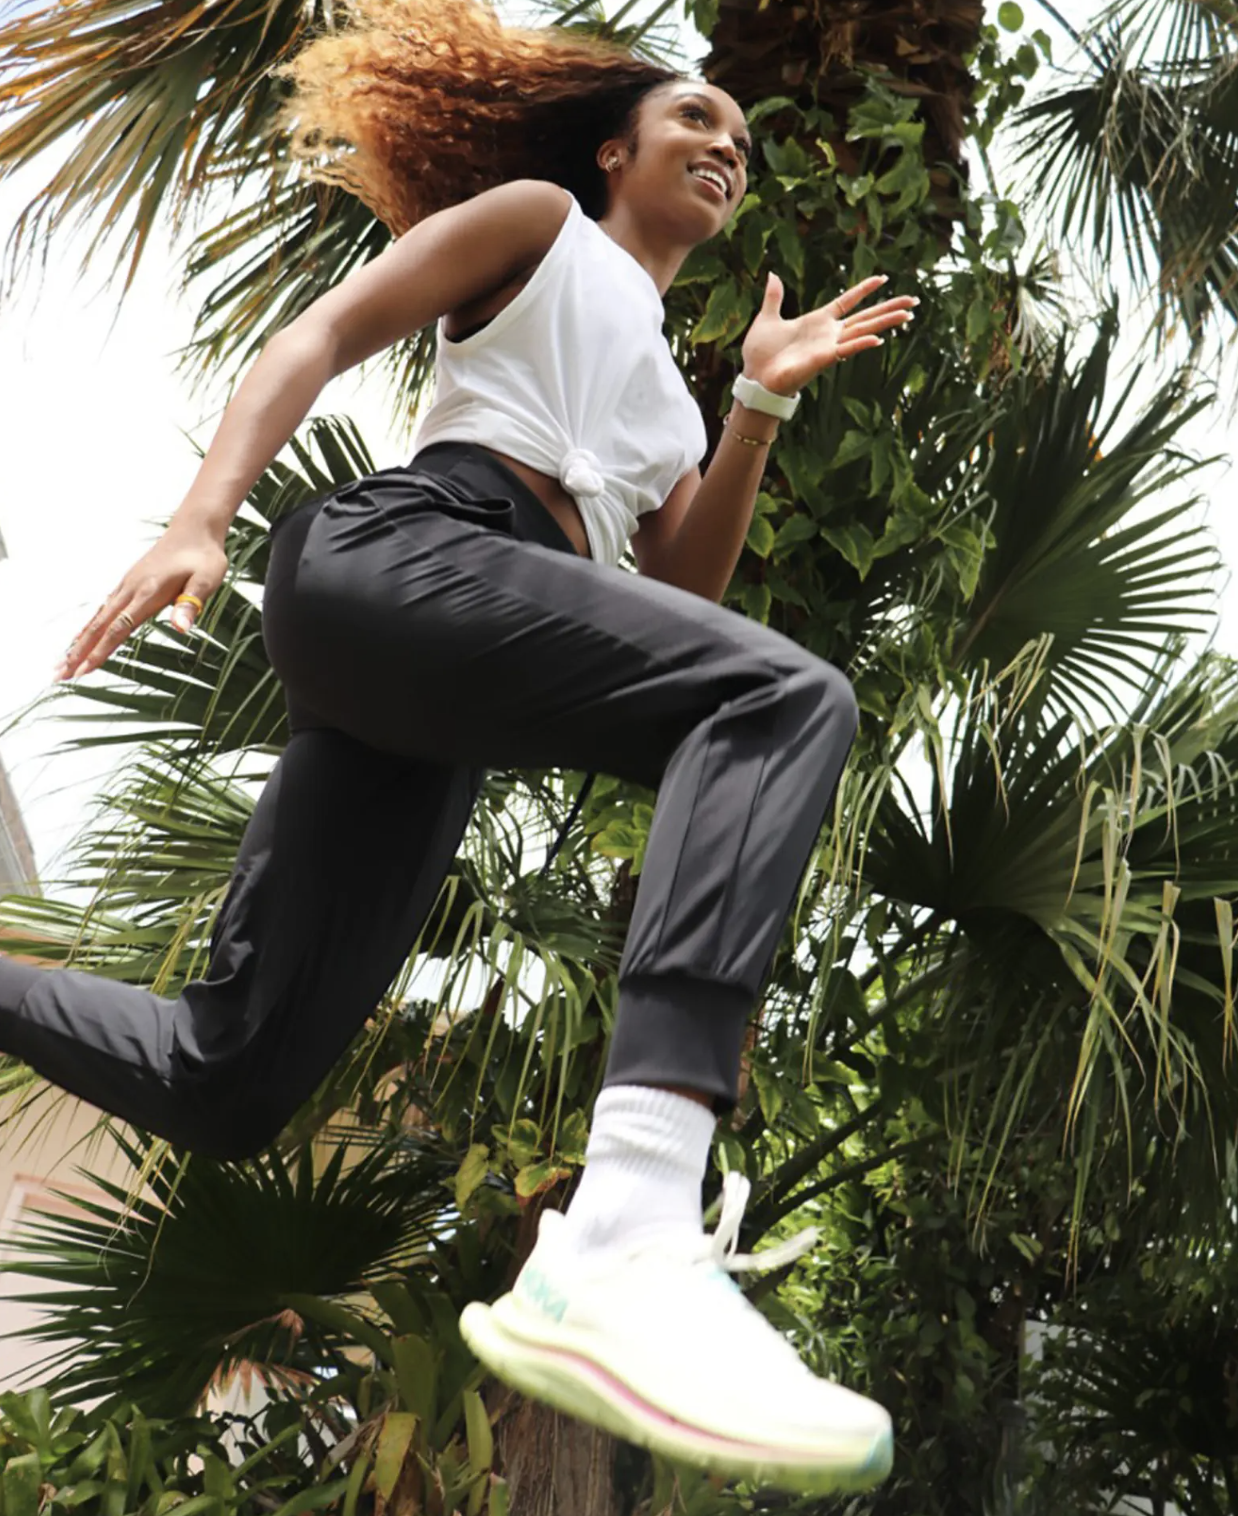 A person jogging under palm trees while wearing the joggers